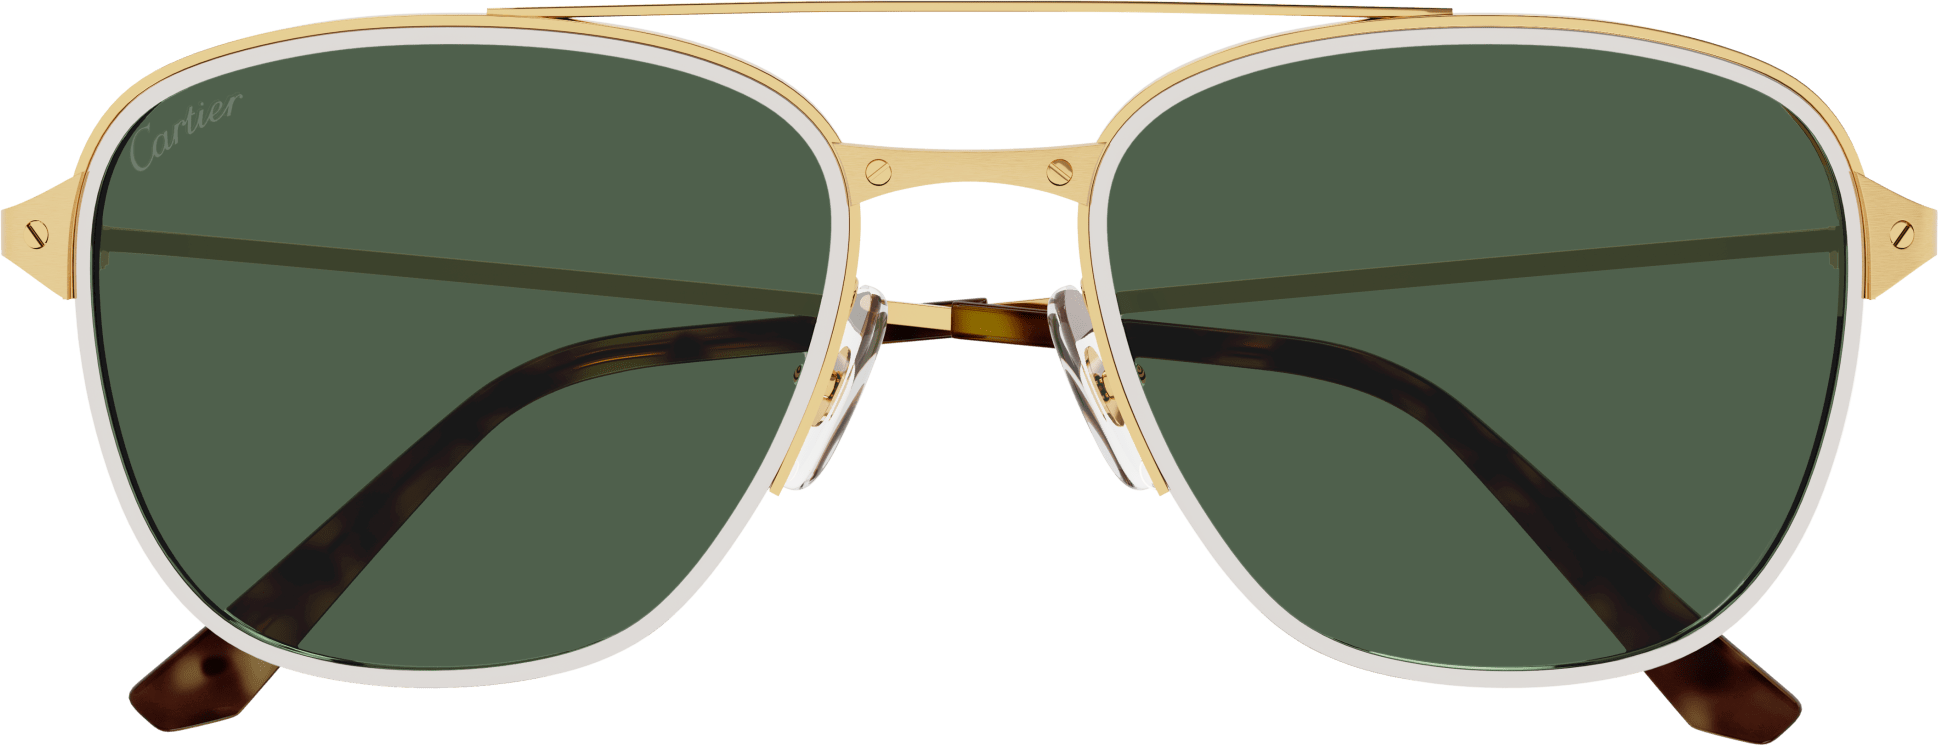 Color_CT0326S-002 - GOLD - GREEN - AR (ANTI REFLECTIVE) - POLARIZED